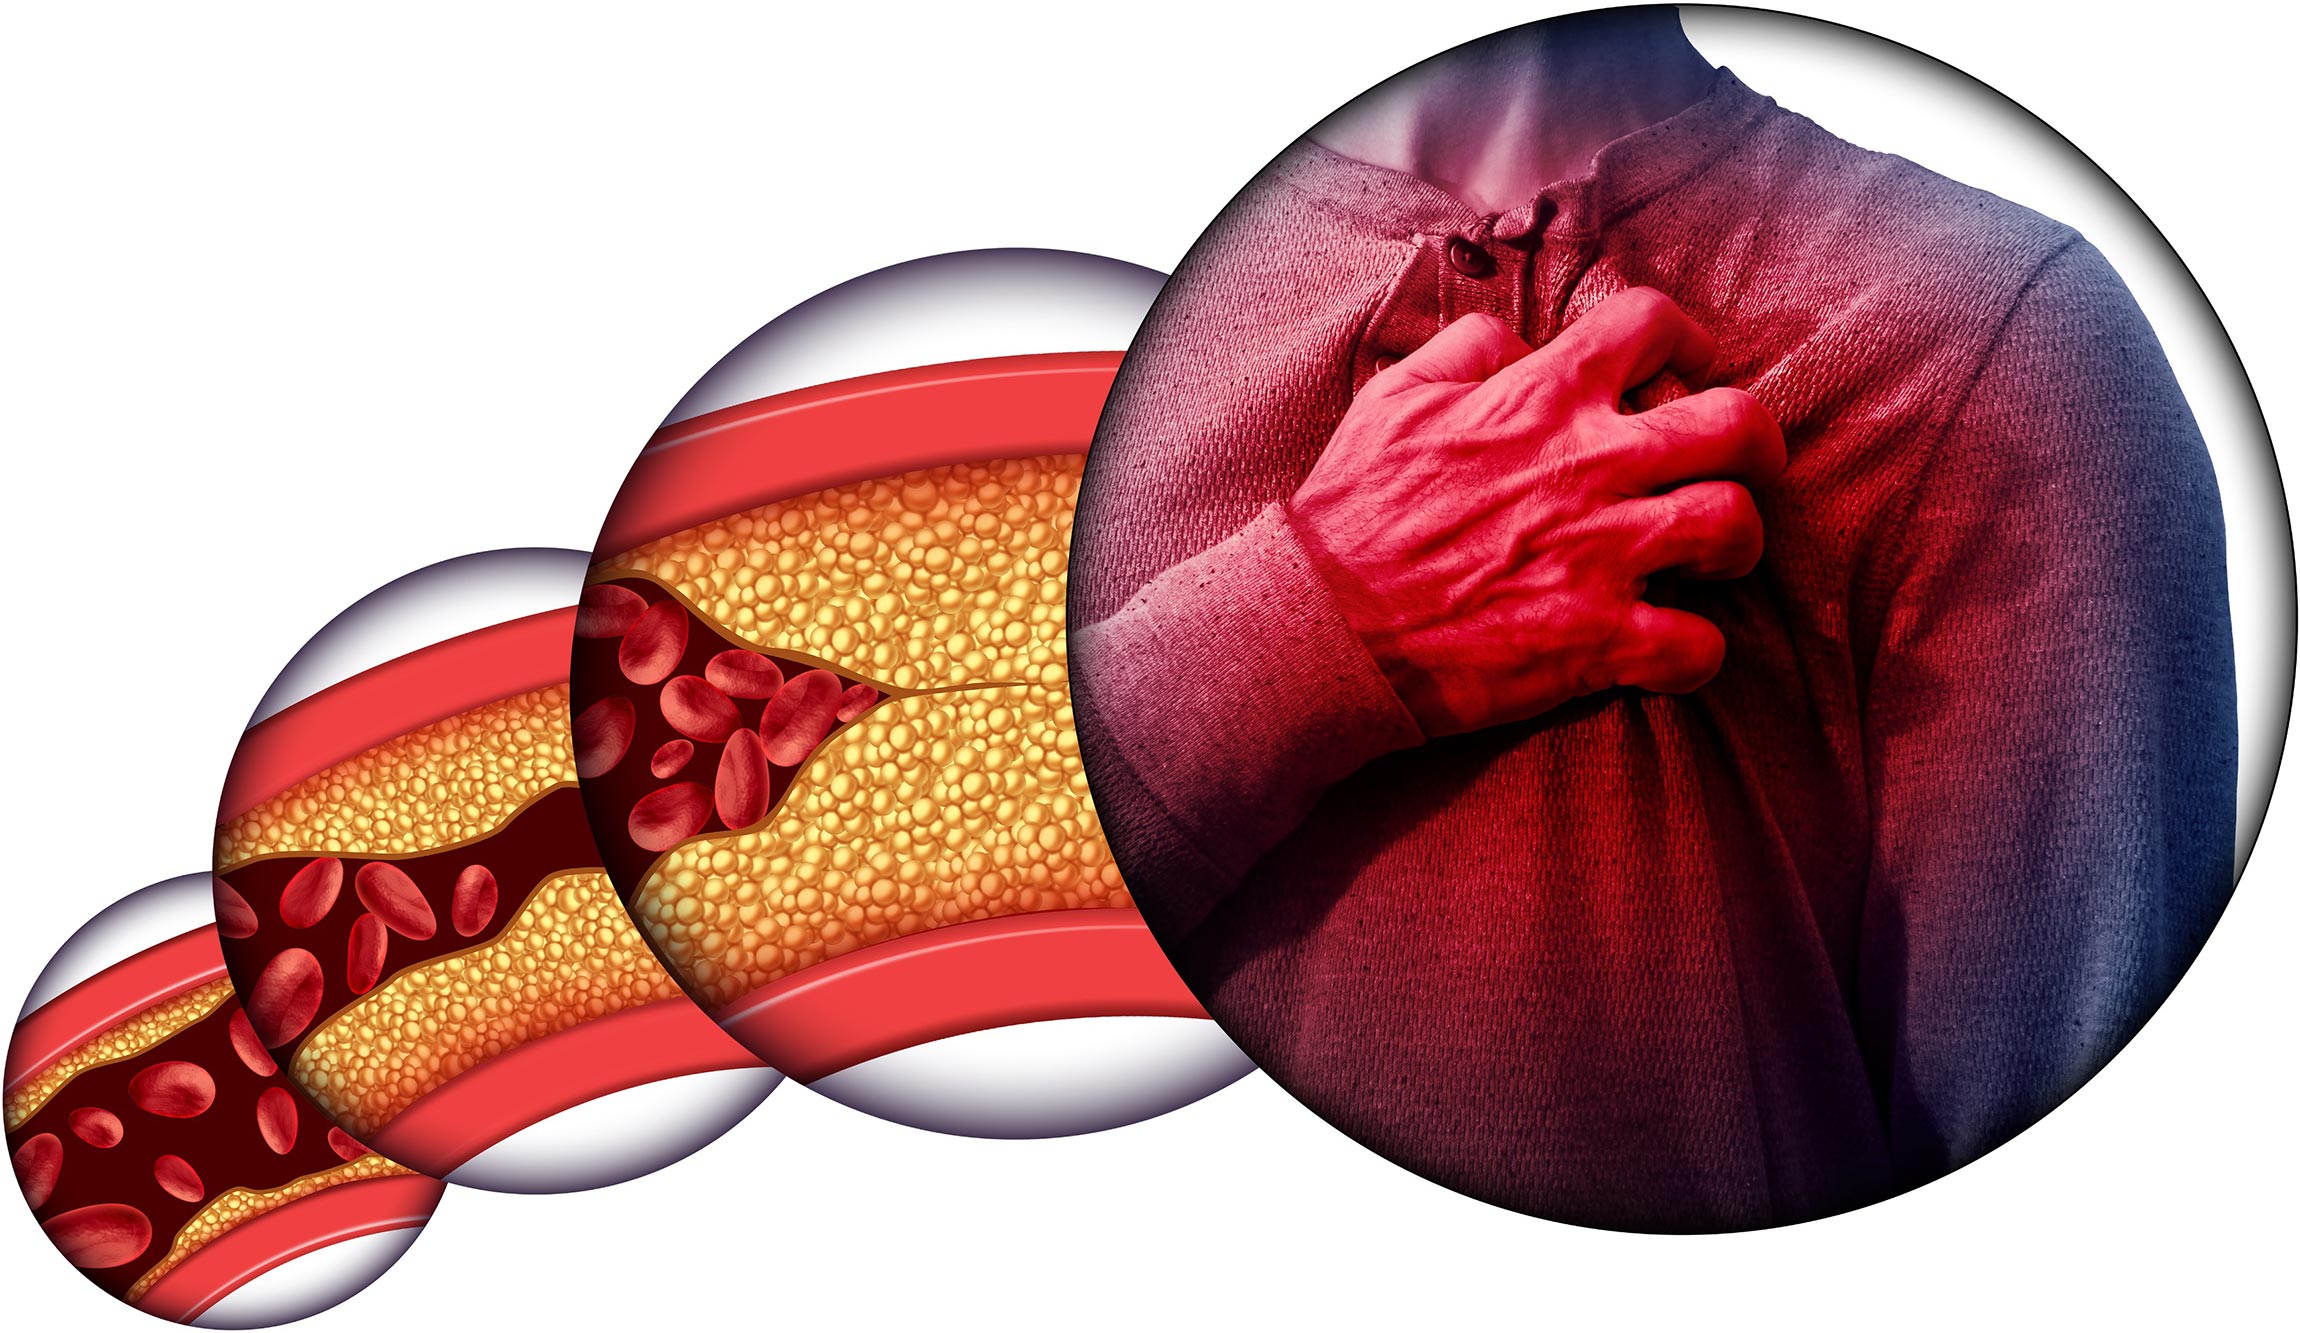 Heart Disease: “Good” Cholesterol May Not Be Good for Everyone – SciTechDaily